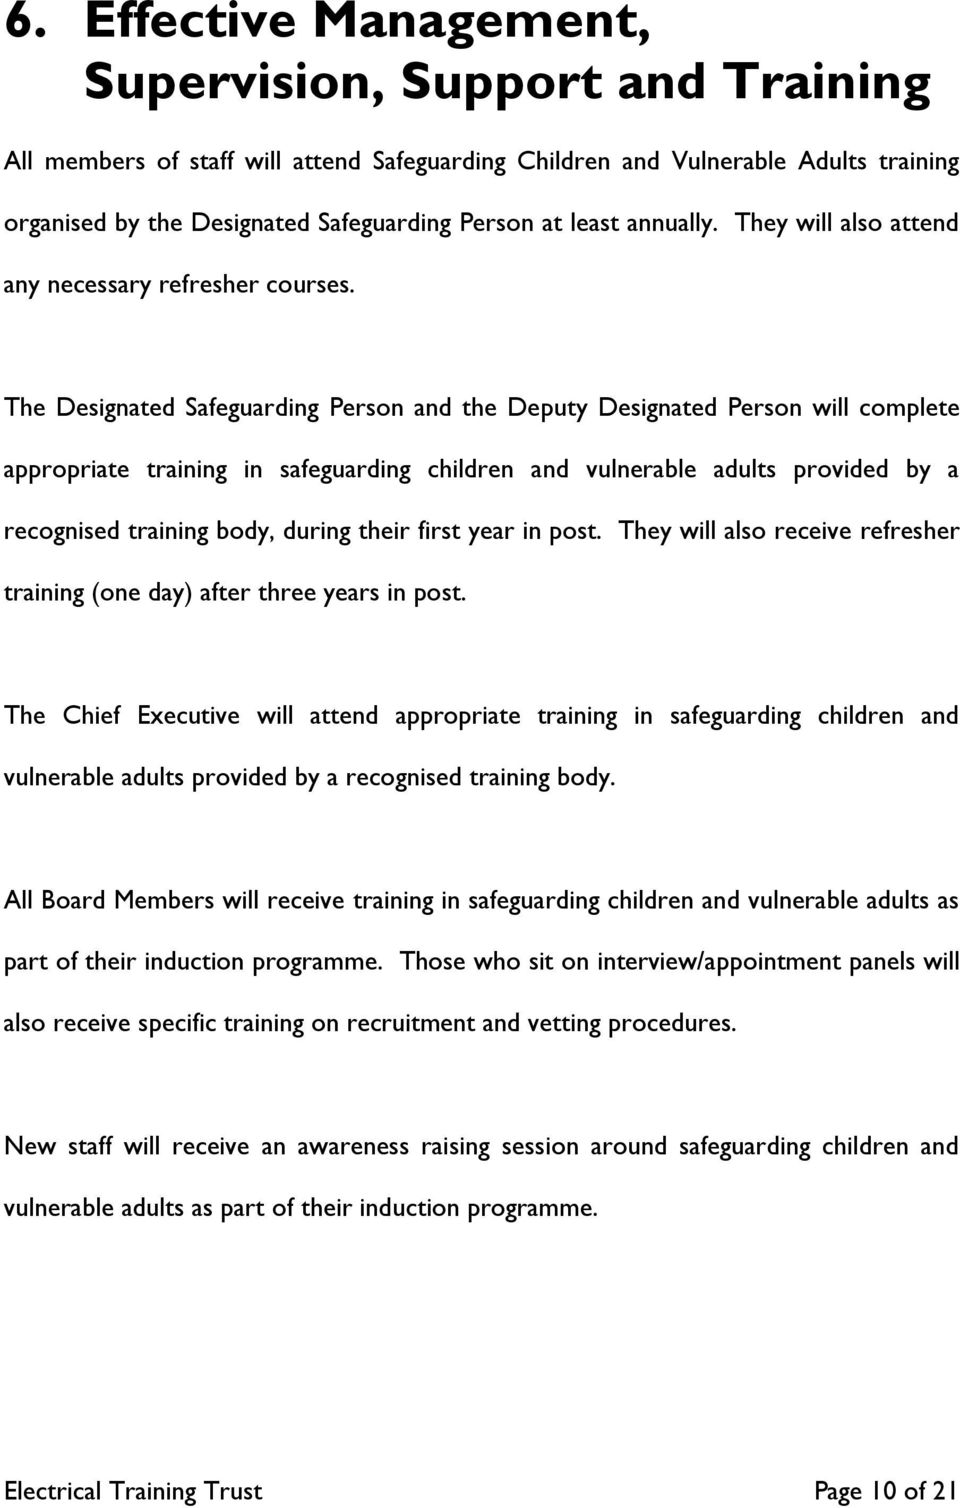 The Designated Safeguarding Person and the Deputy Designated Person will complete appropriate training in safeguarding children and vulnerable adults provided by a recognised training body, during